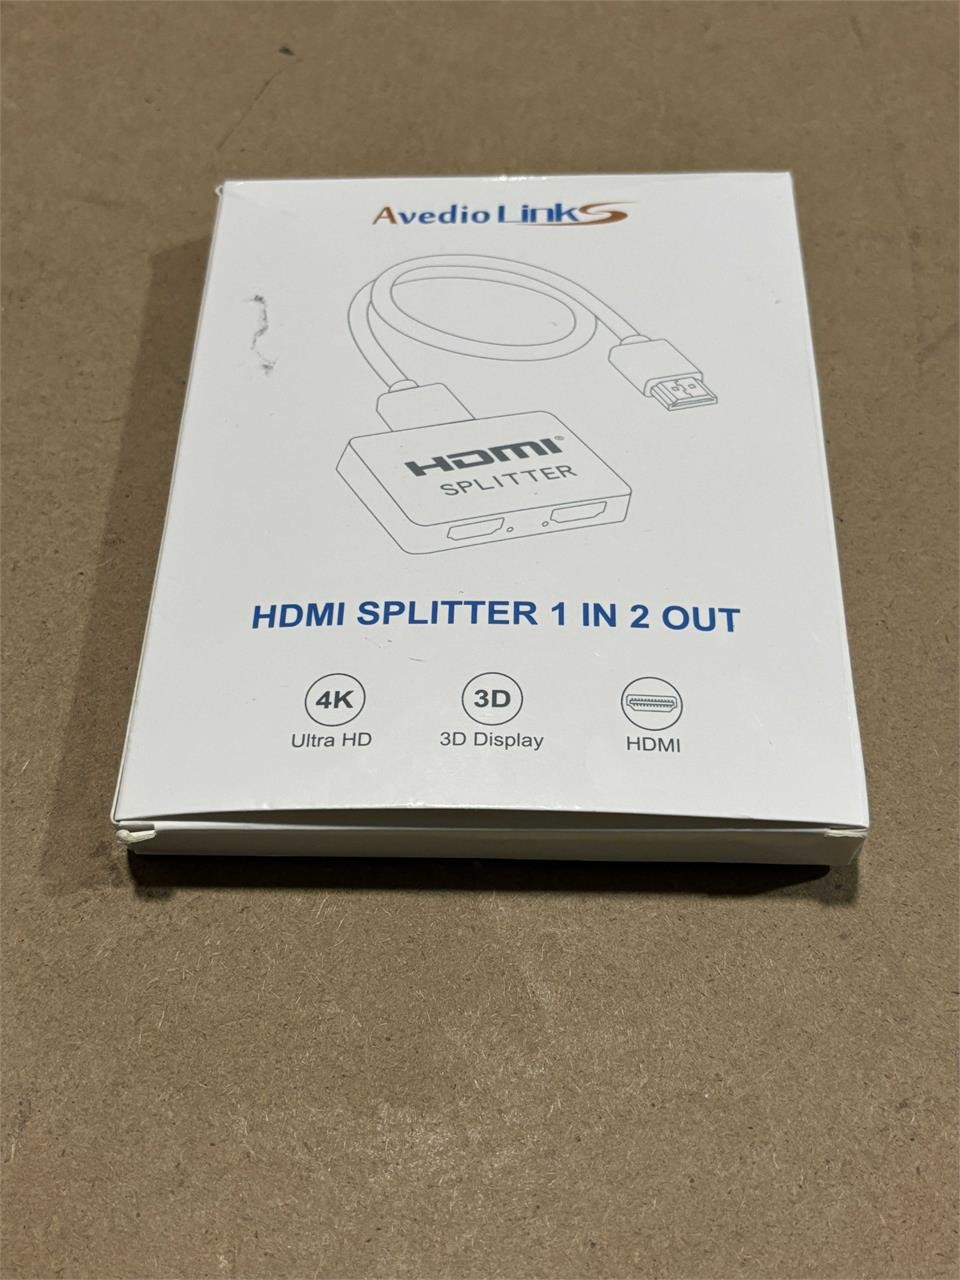 Avedio link HDMI splitter 1 in 2 out